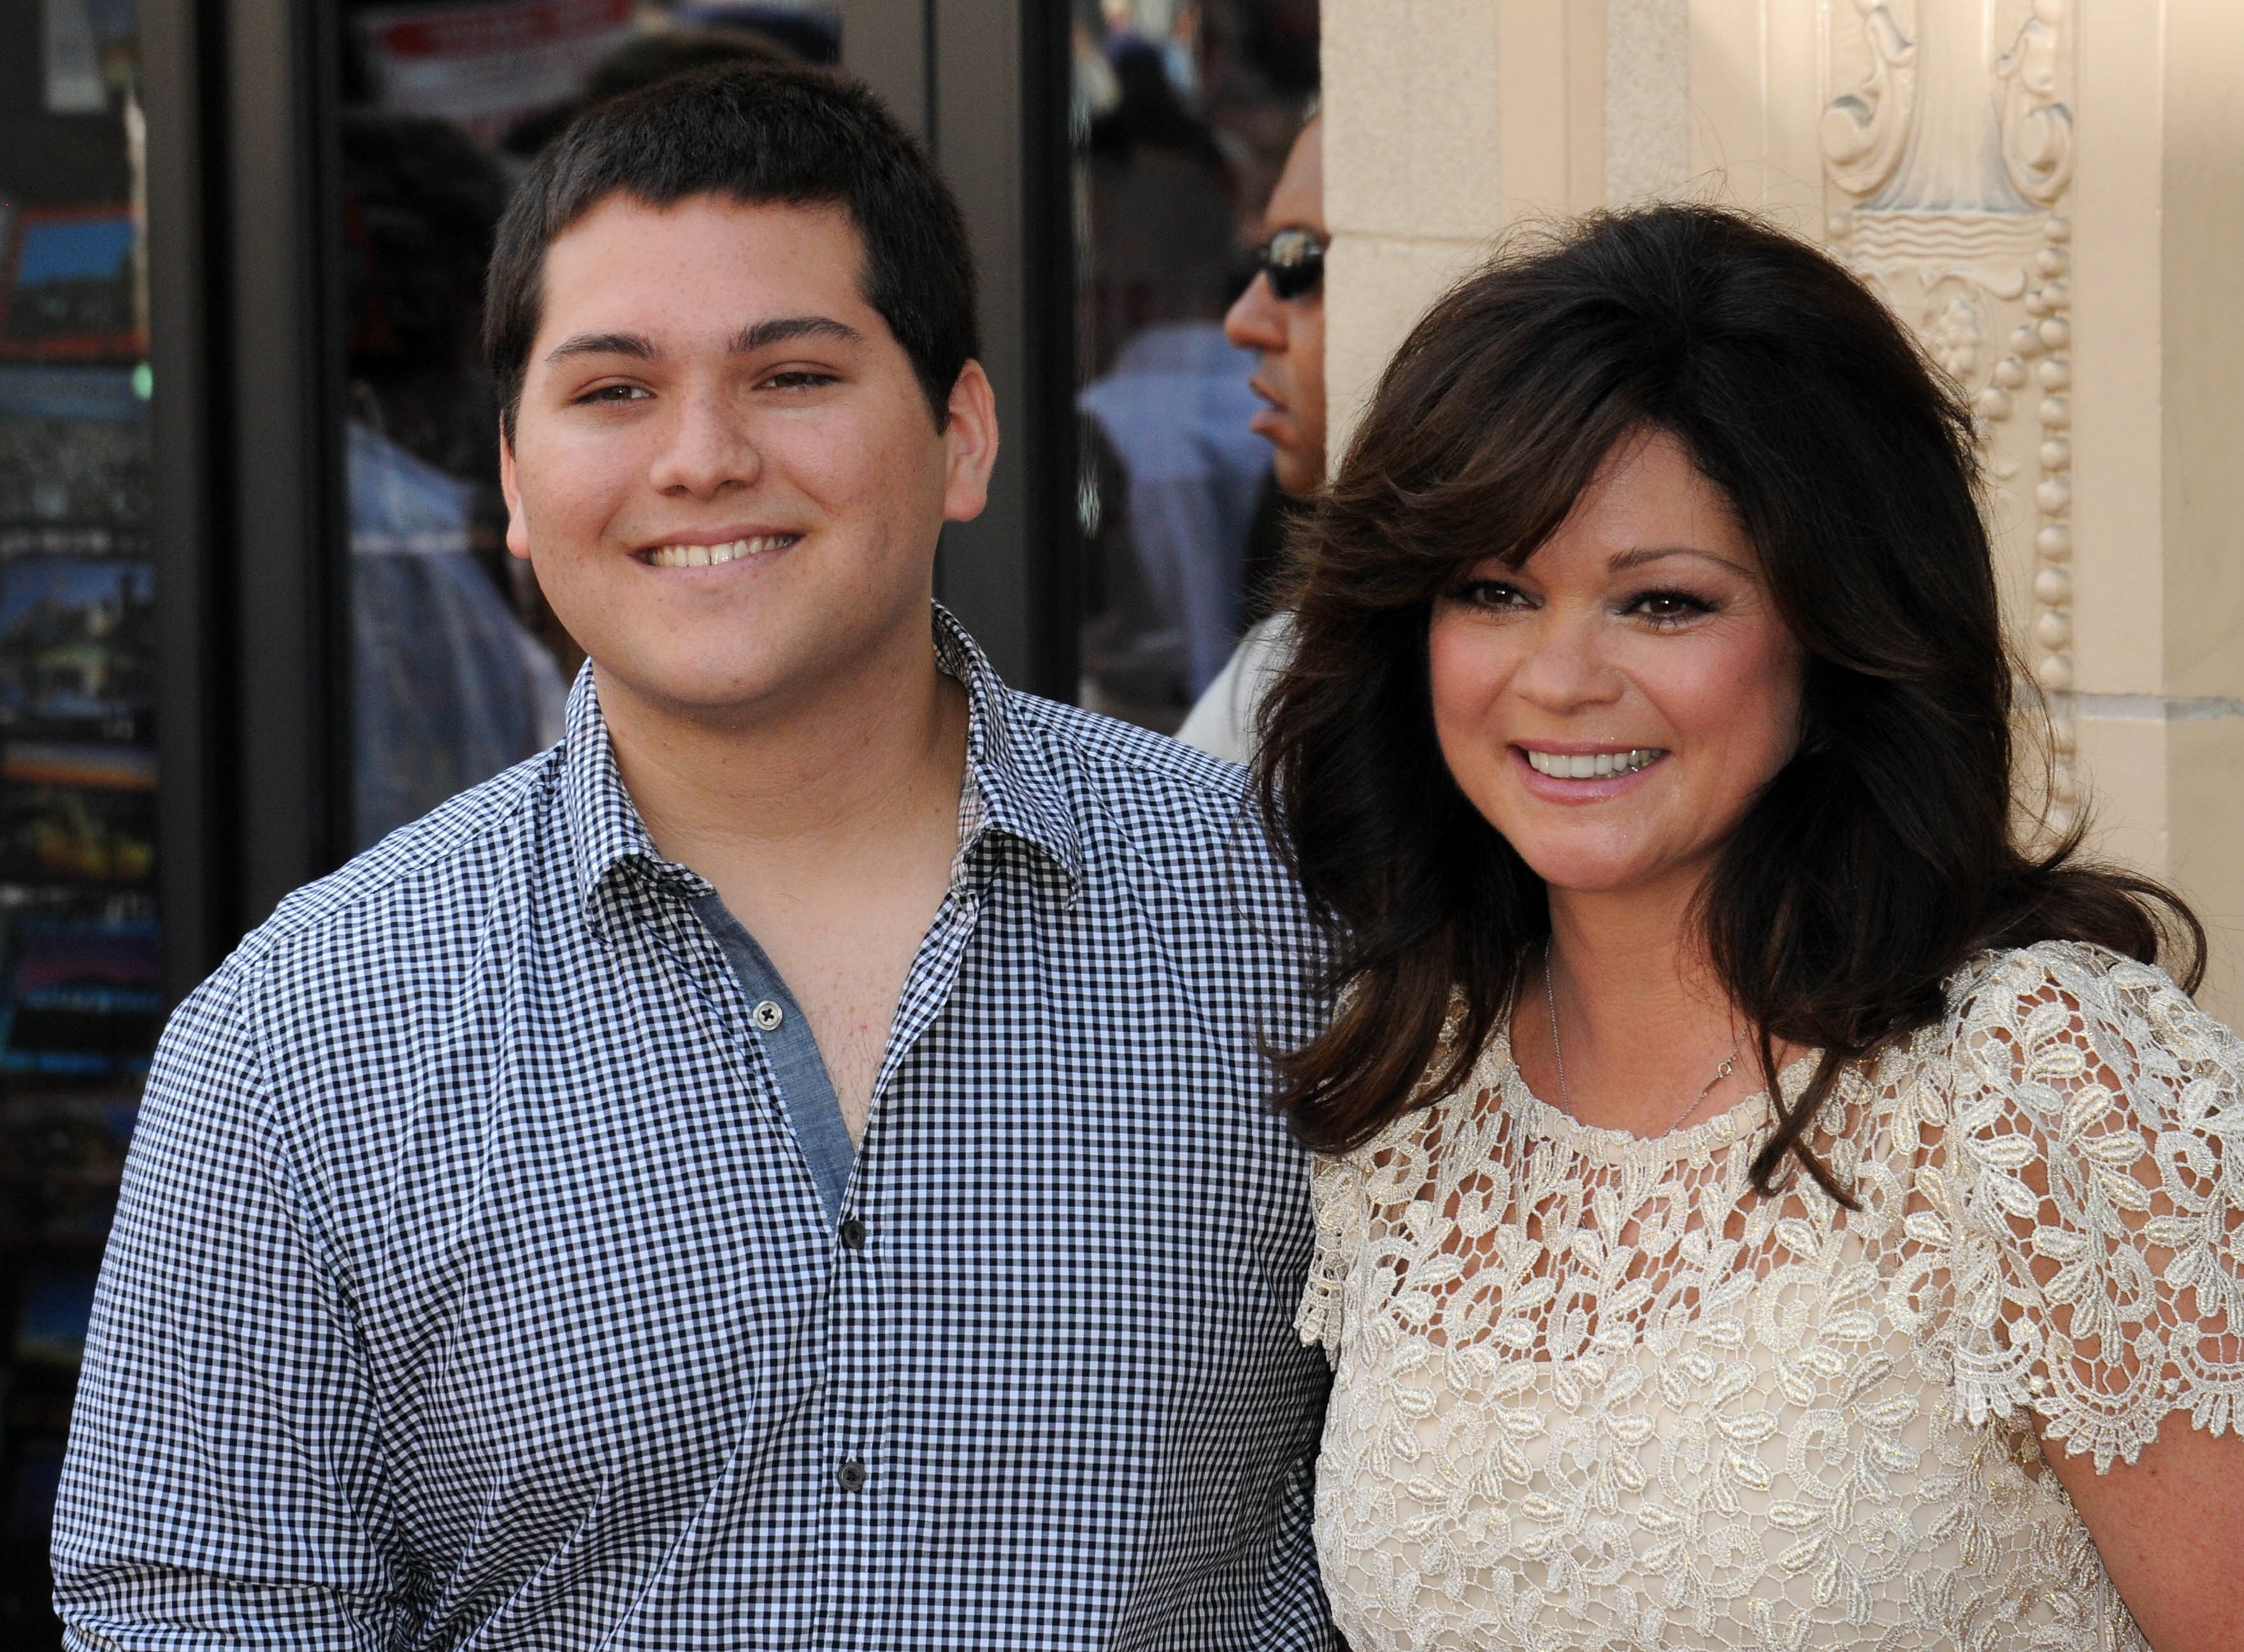 Wolfgang Van Halen and Valerie Bertinelli participate in the Hollywood Walk Of Fame Star ceremony on August 22, 2012 | Photo: Getty Images